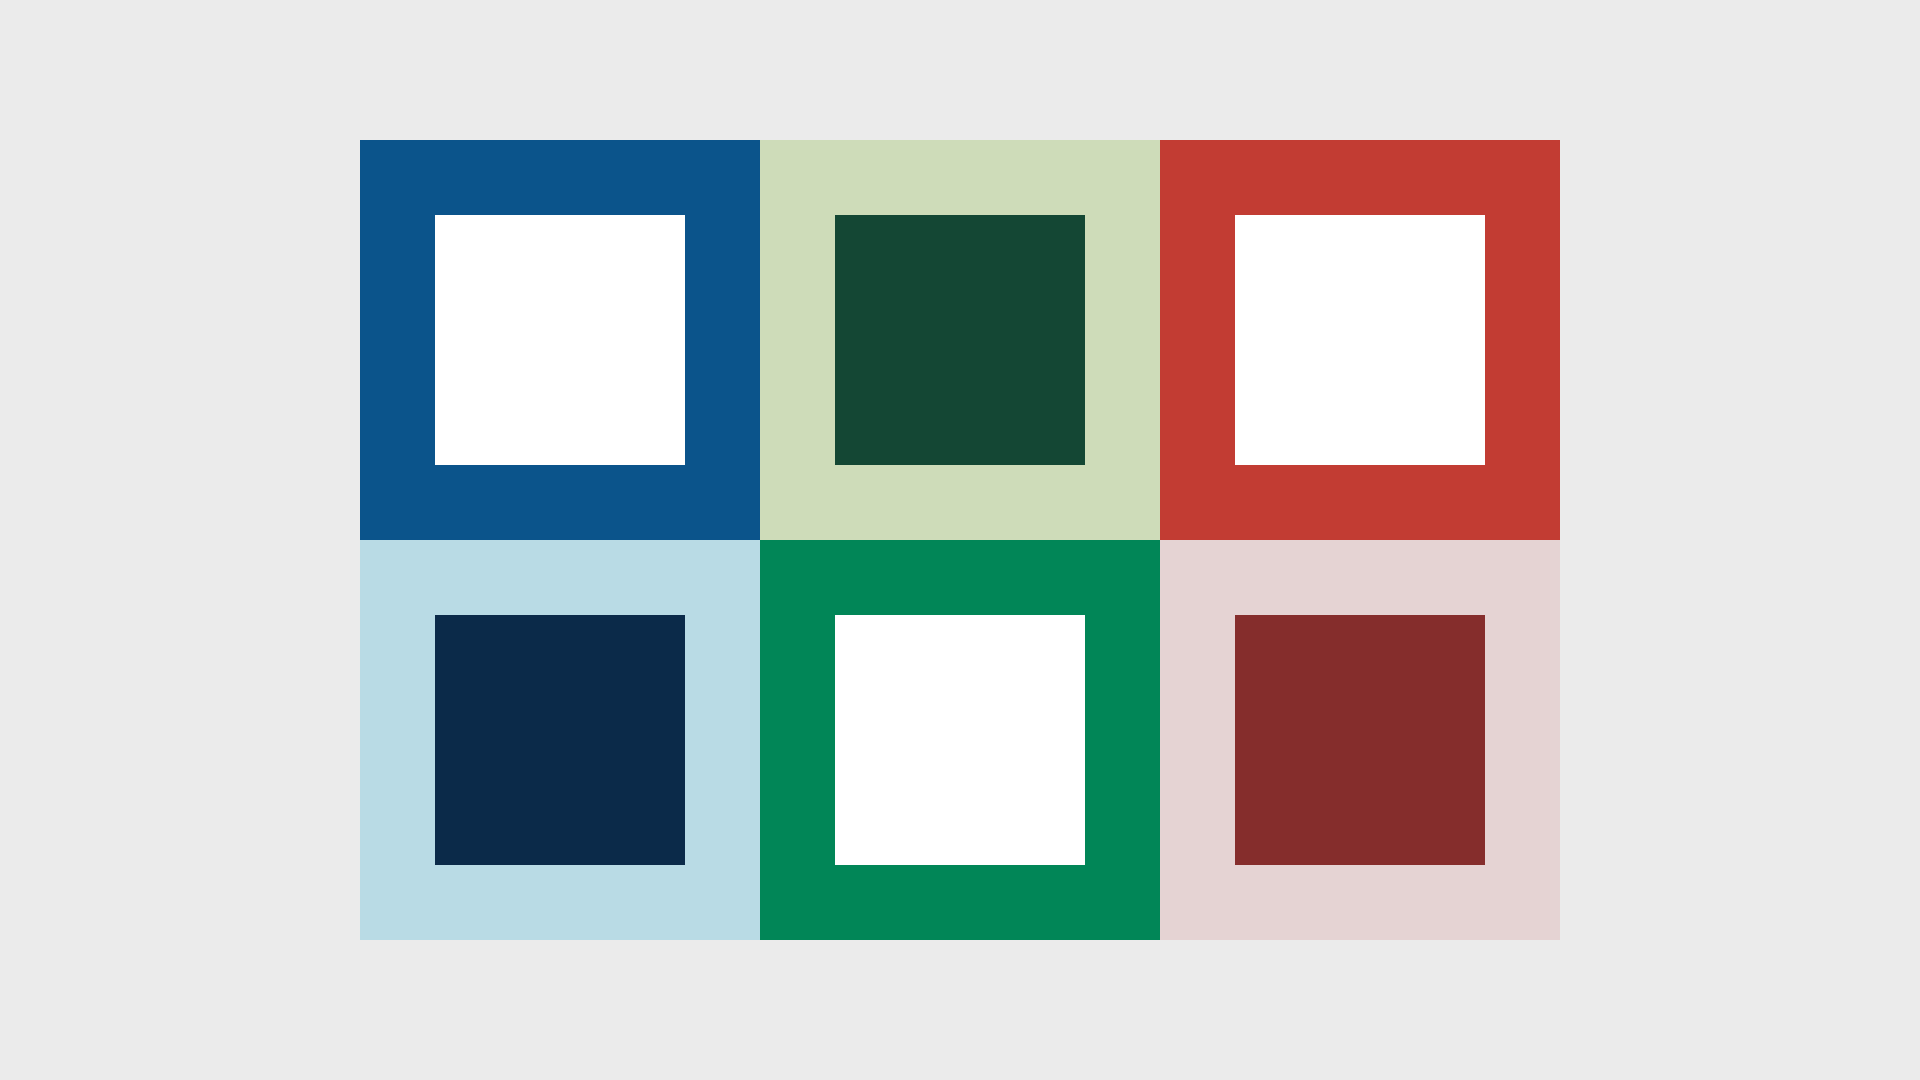 A grid of brand color combinations. Triarama’s brand colors are blue, green, and red, and each color is used in conjunction with white or a different shade of itself.